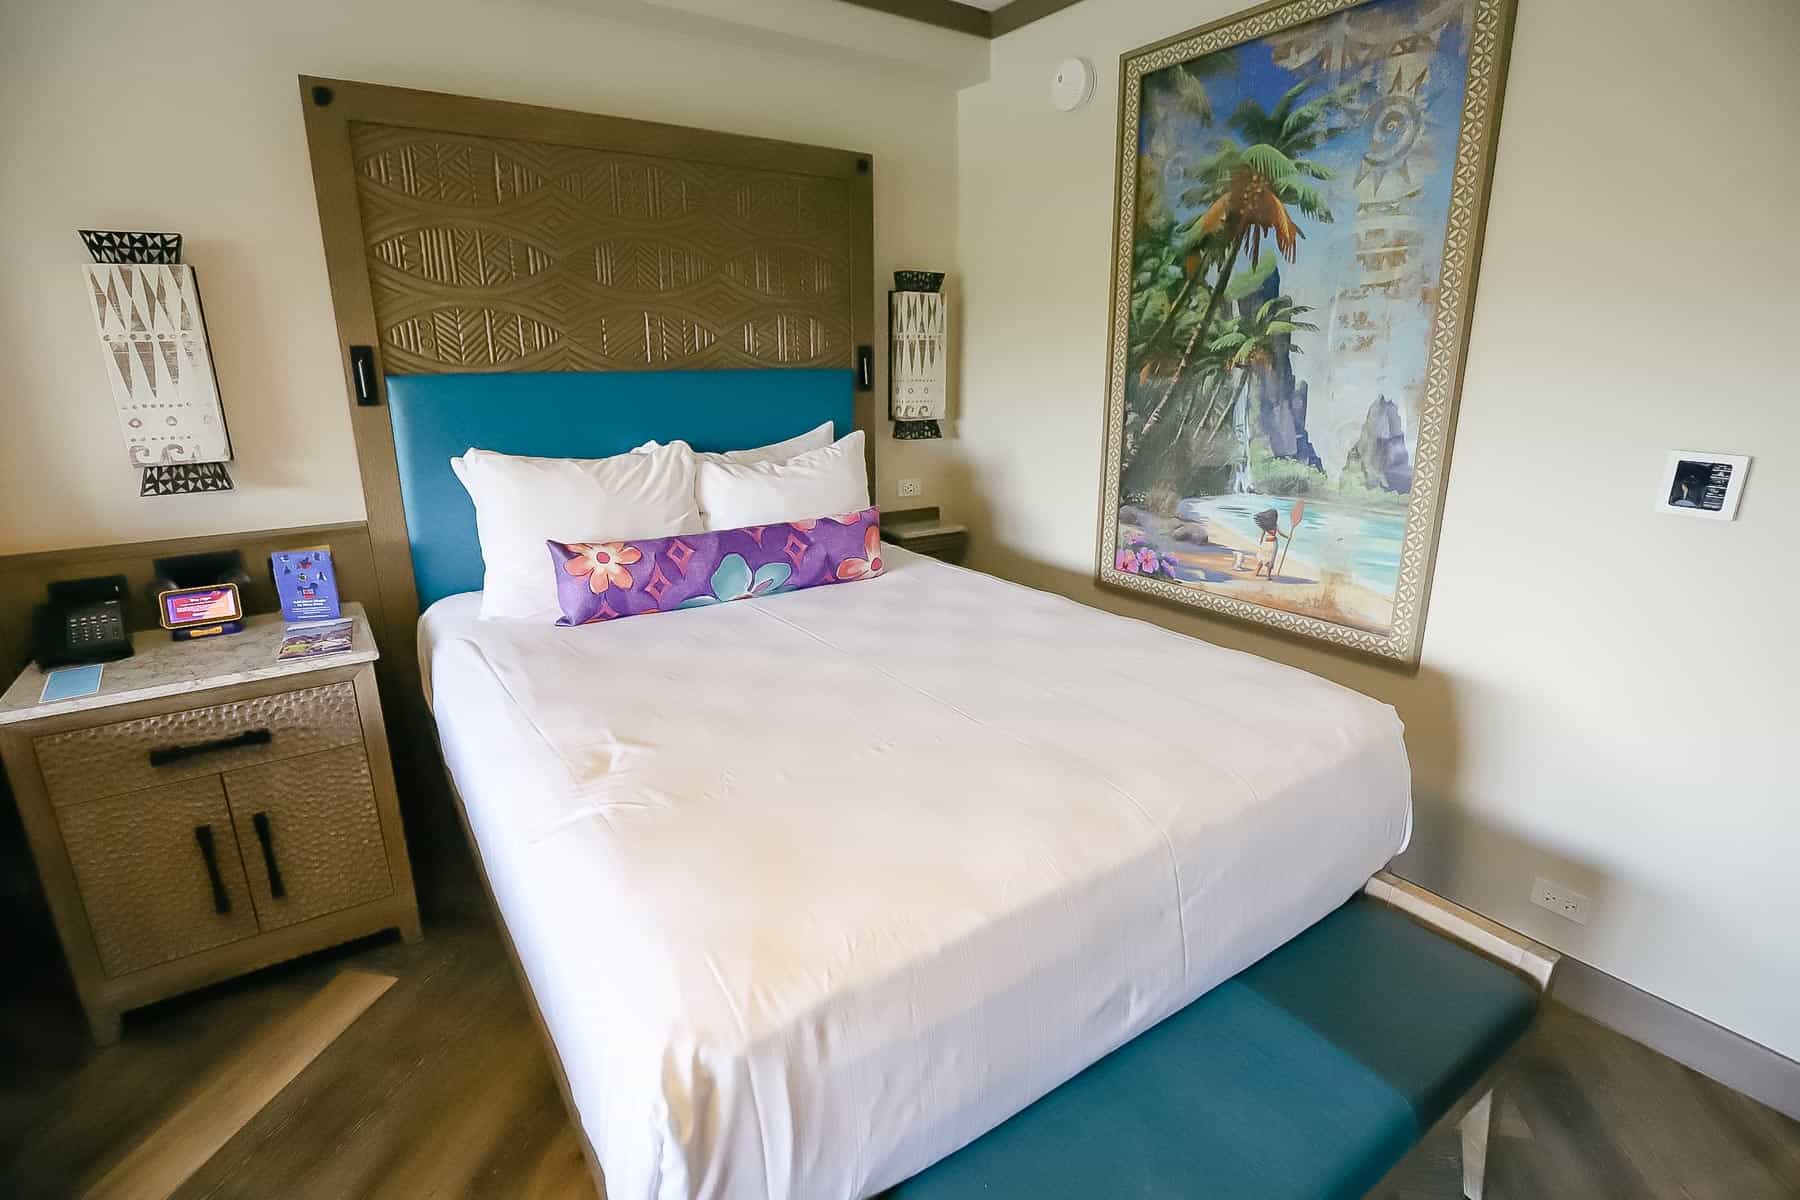 bed on the right side with artwork on the wall 